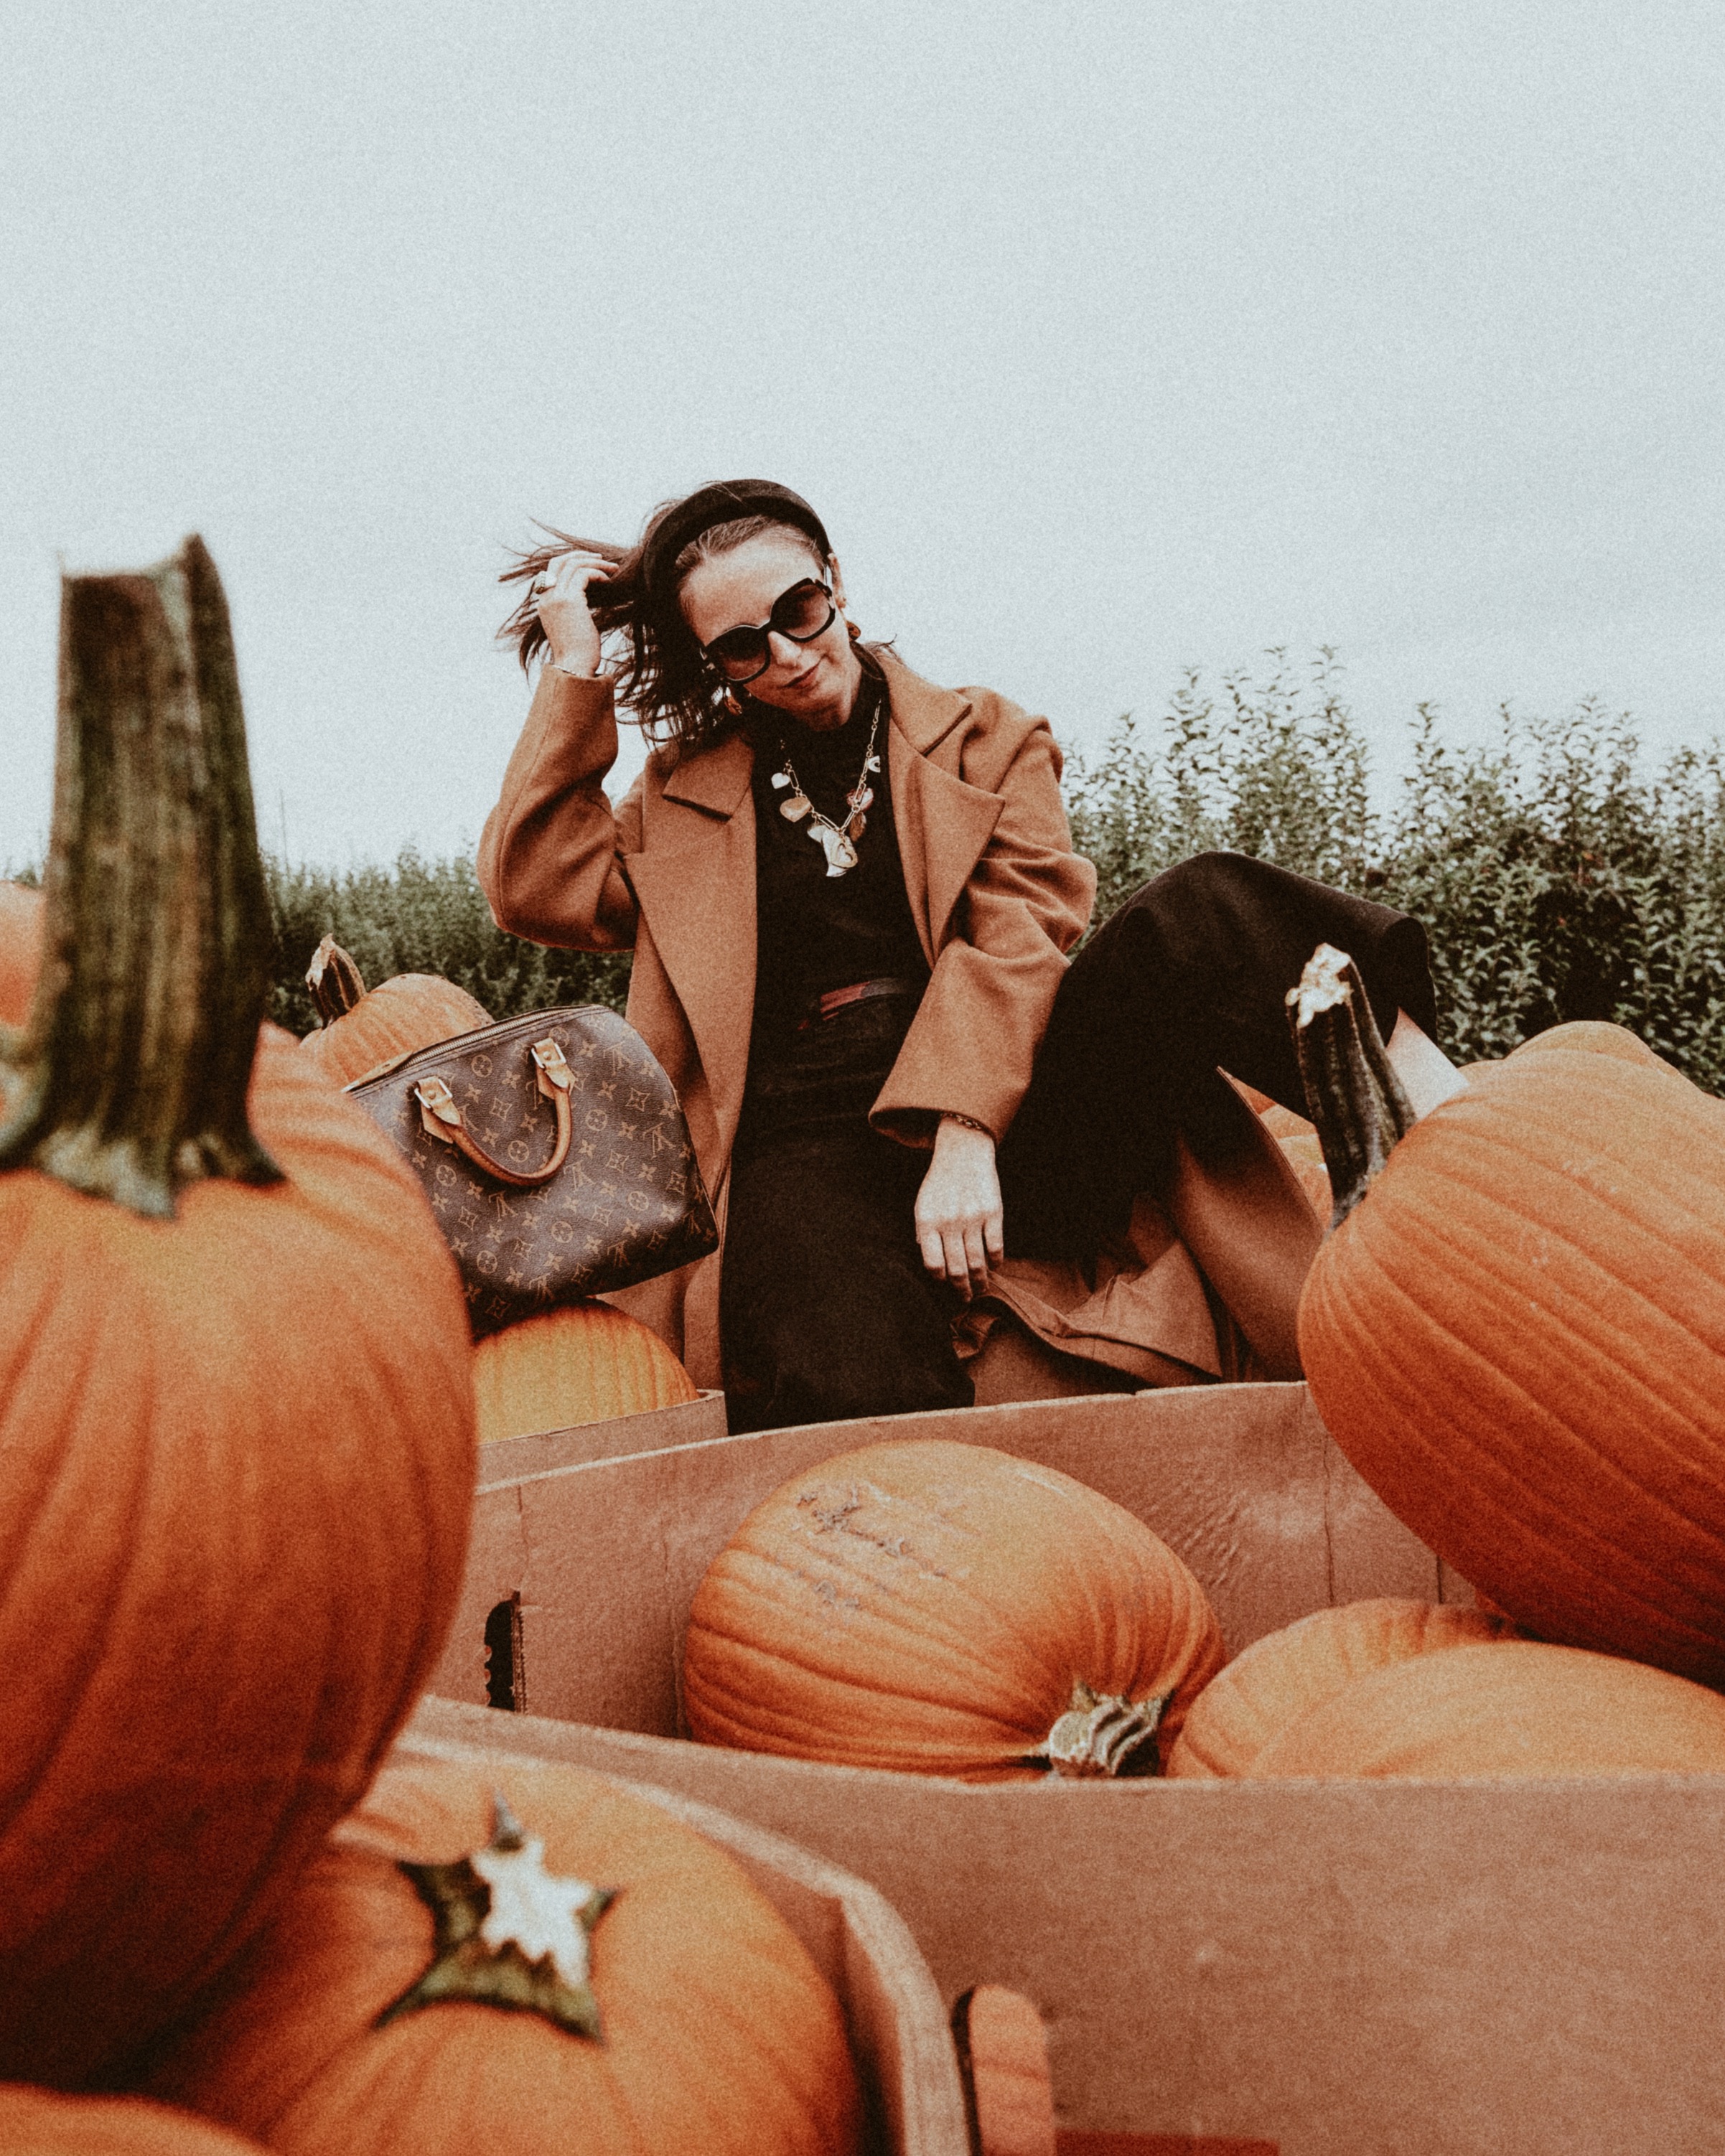 Girls Trip Apple Picking and Pumpkin Picking Outside of NYC - Simply by Simone - Simone Piliero - Photographer Riley McCarthy – Barton Orchard – Dutchess Coutny - Fall Fashion - Fall Outfit - Fall Style - Apples - Tree - Louis Vuitton #fashion - Camel Coat - Black Jeans - Vans Sneakers - fashion poses - #outfit #style #fallfashion #falloutfit #westchestercounty #dutchesscounty #nyc #northofnyc #suburbs #pumpkinpicking #bloggerstyle #applepicking #pumkinpatch #poses